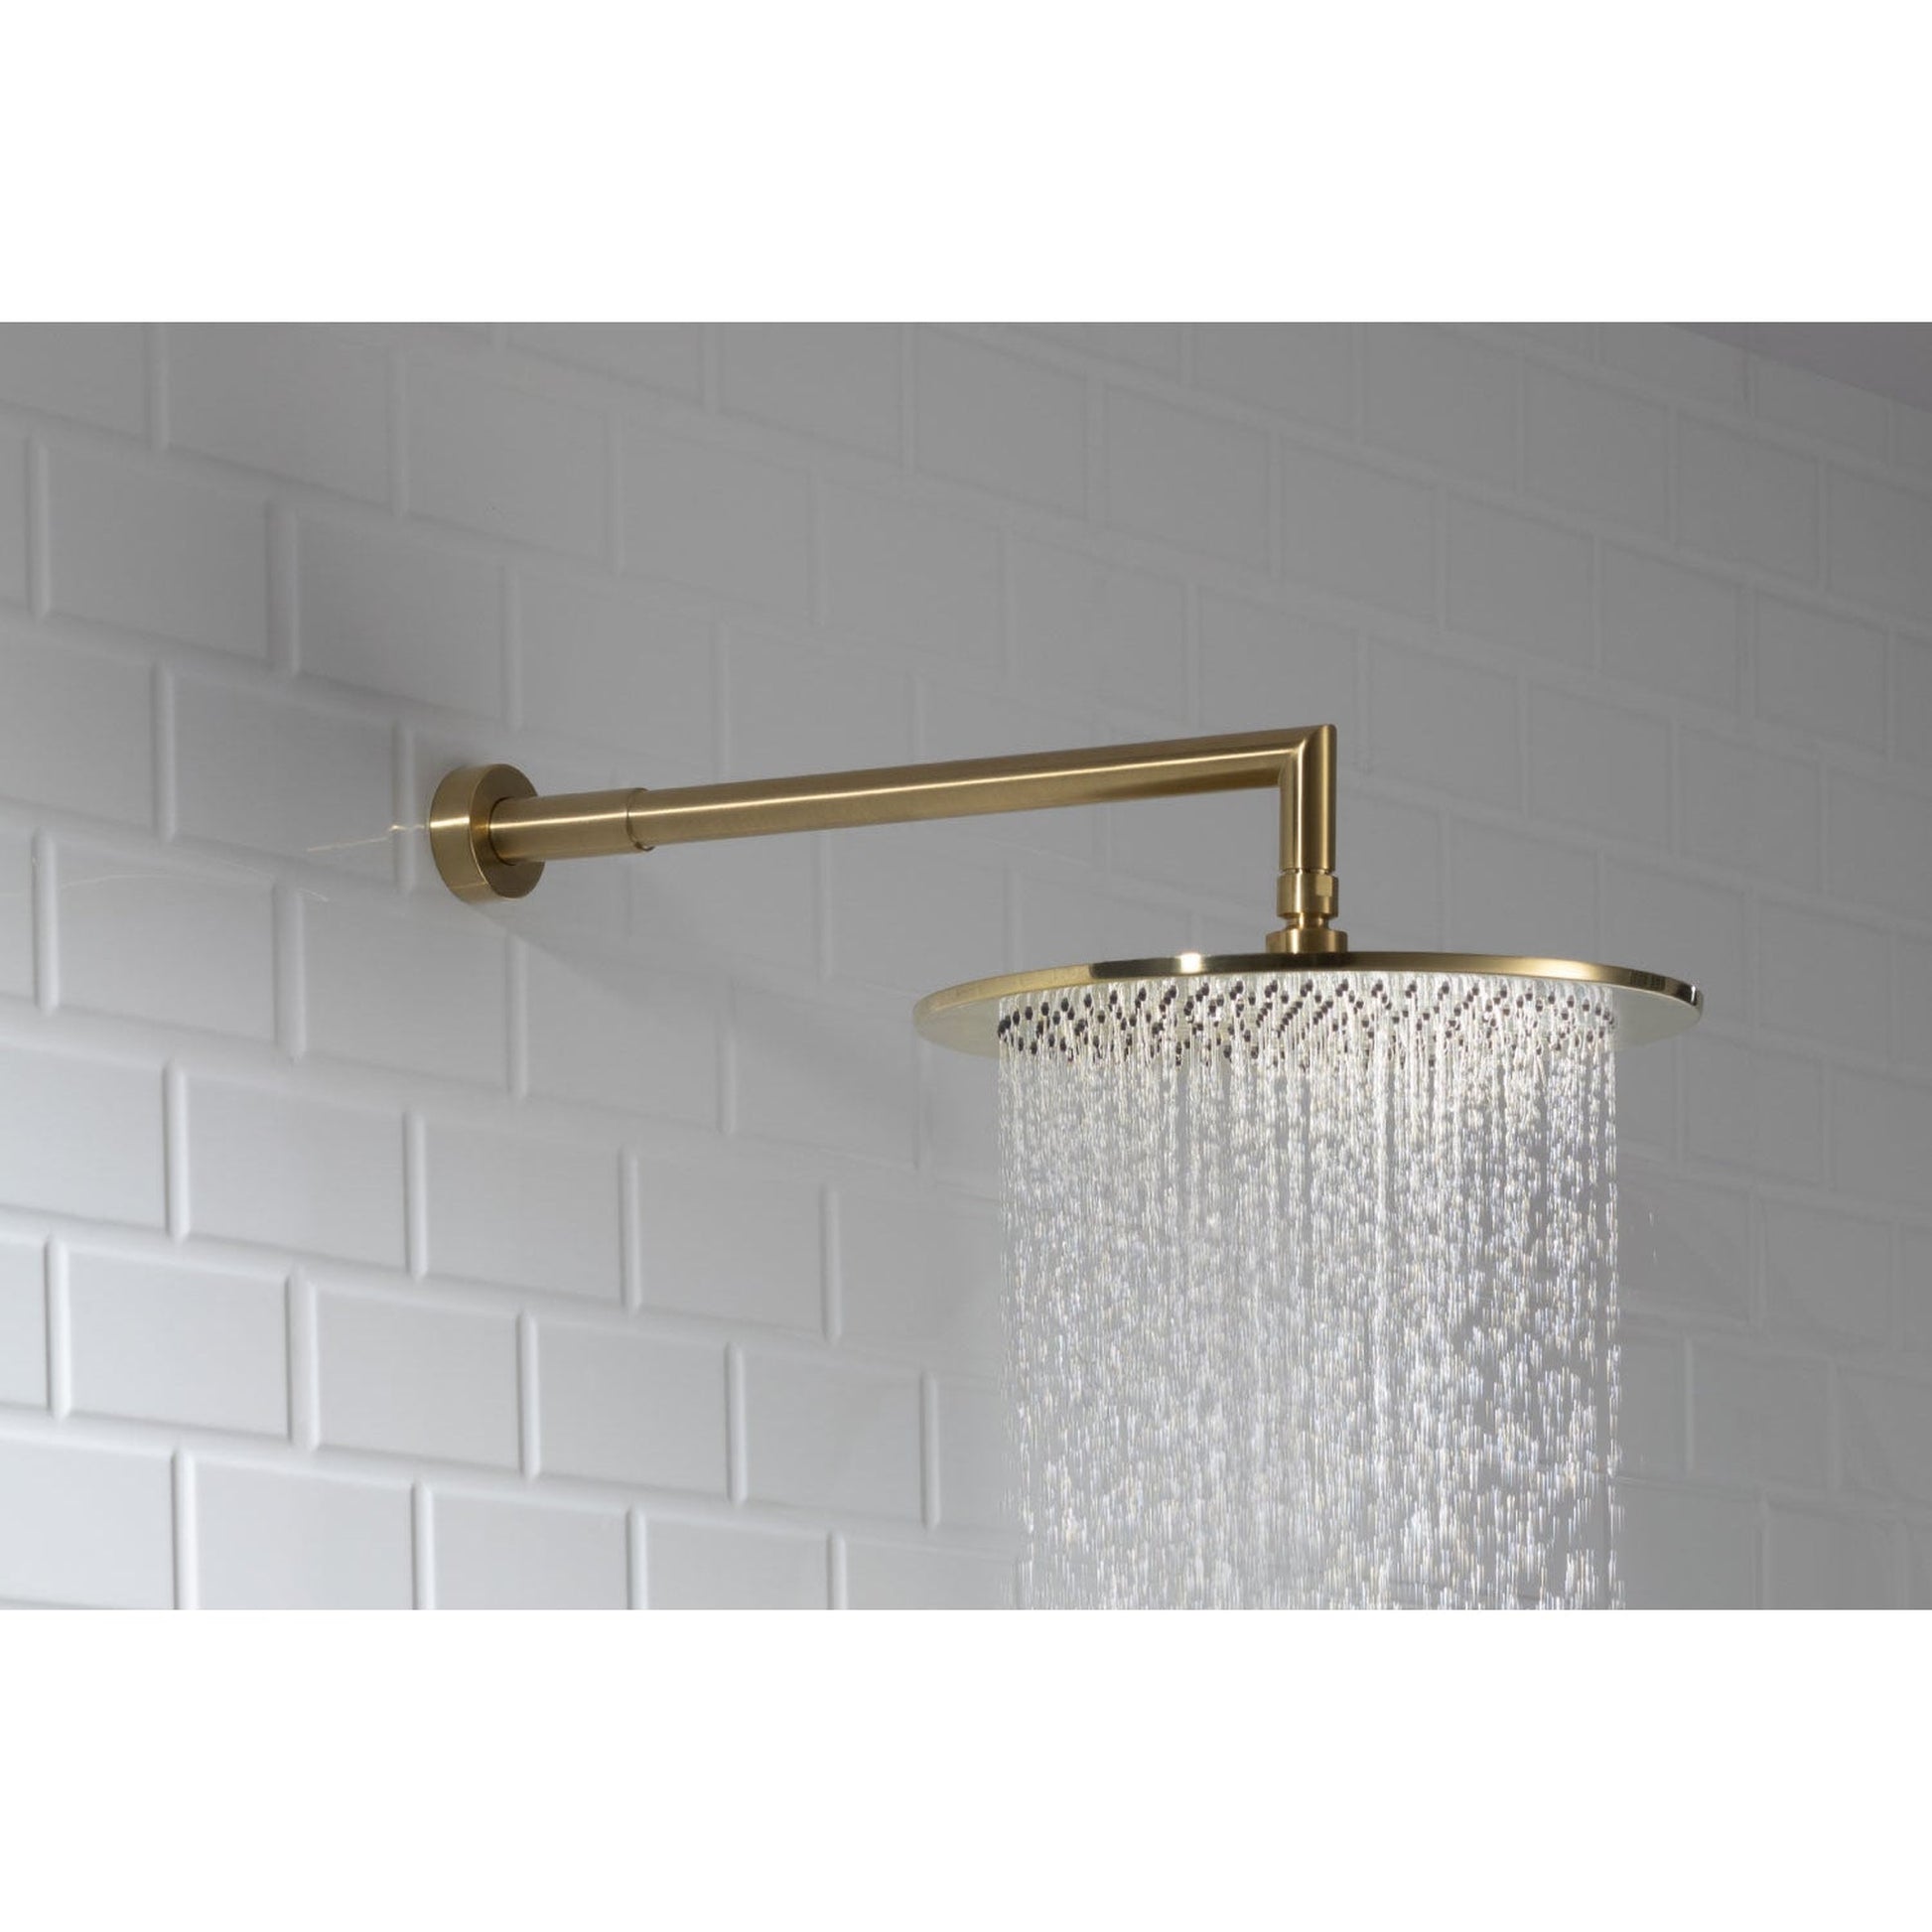 Isenberg Universal Fixtures 16" Brushed Nickel PVD Solid Brass Wall-Mounted Shower Arm With Angled Extension and Round Sliding Flange